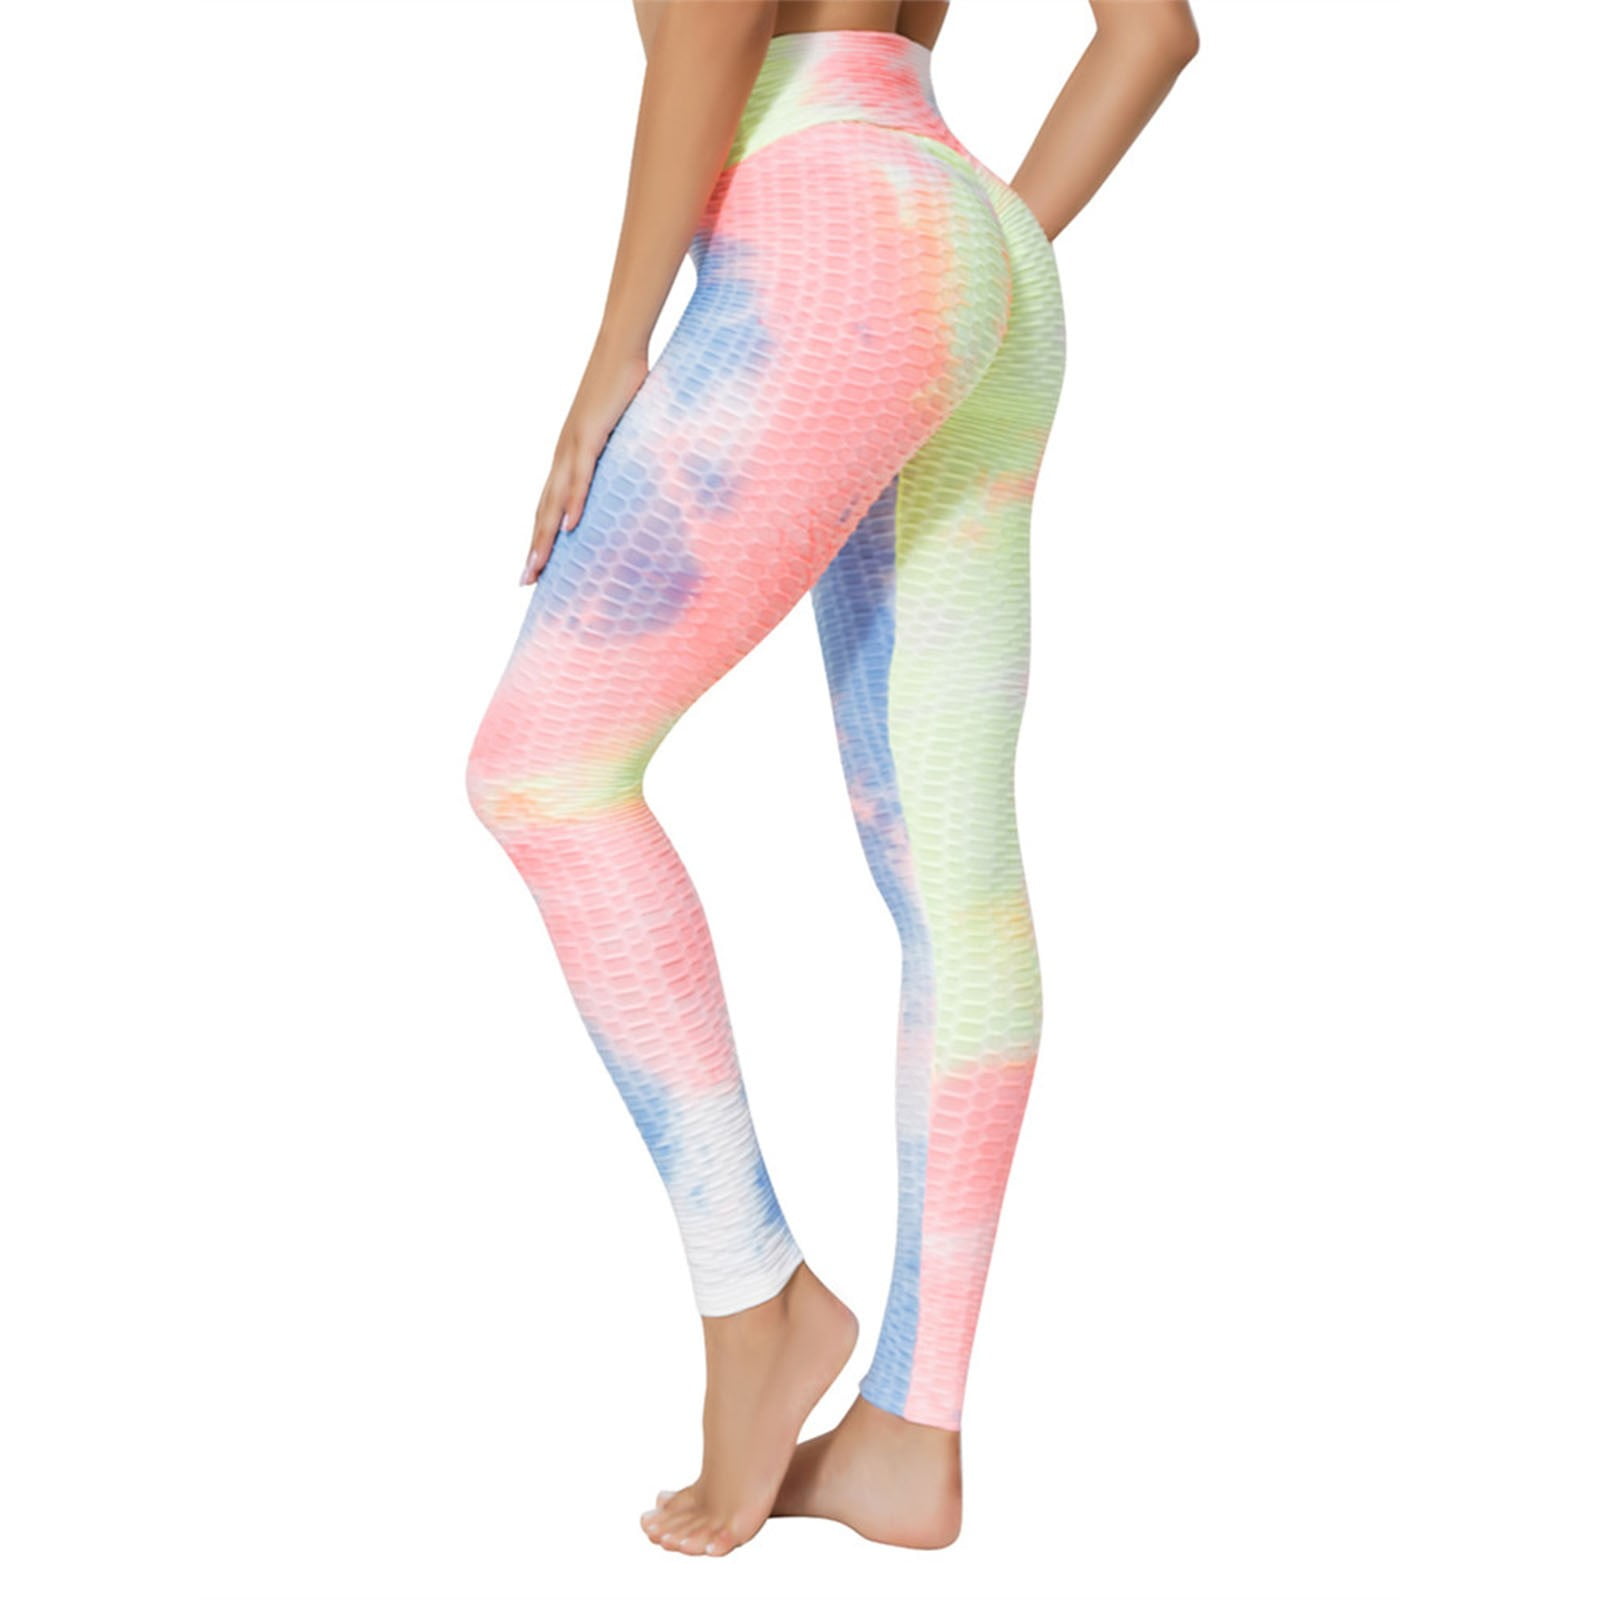 EQWLJWE Scrunch Butt Lift Leggings for Women Workout Tie Dye Yoga Pants  Ruched Booty High Waist Seamless Leggings Compression Tights 